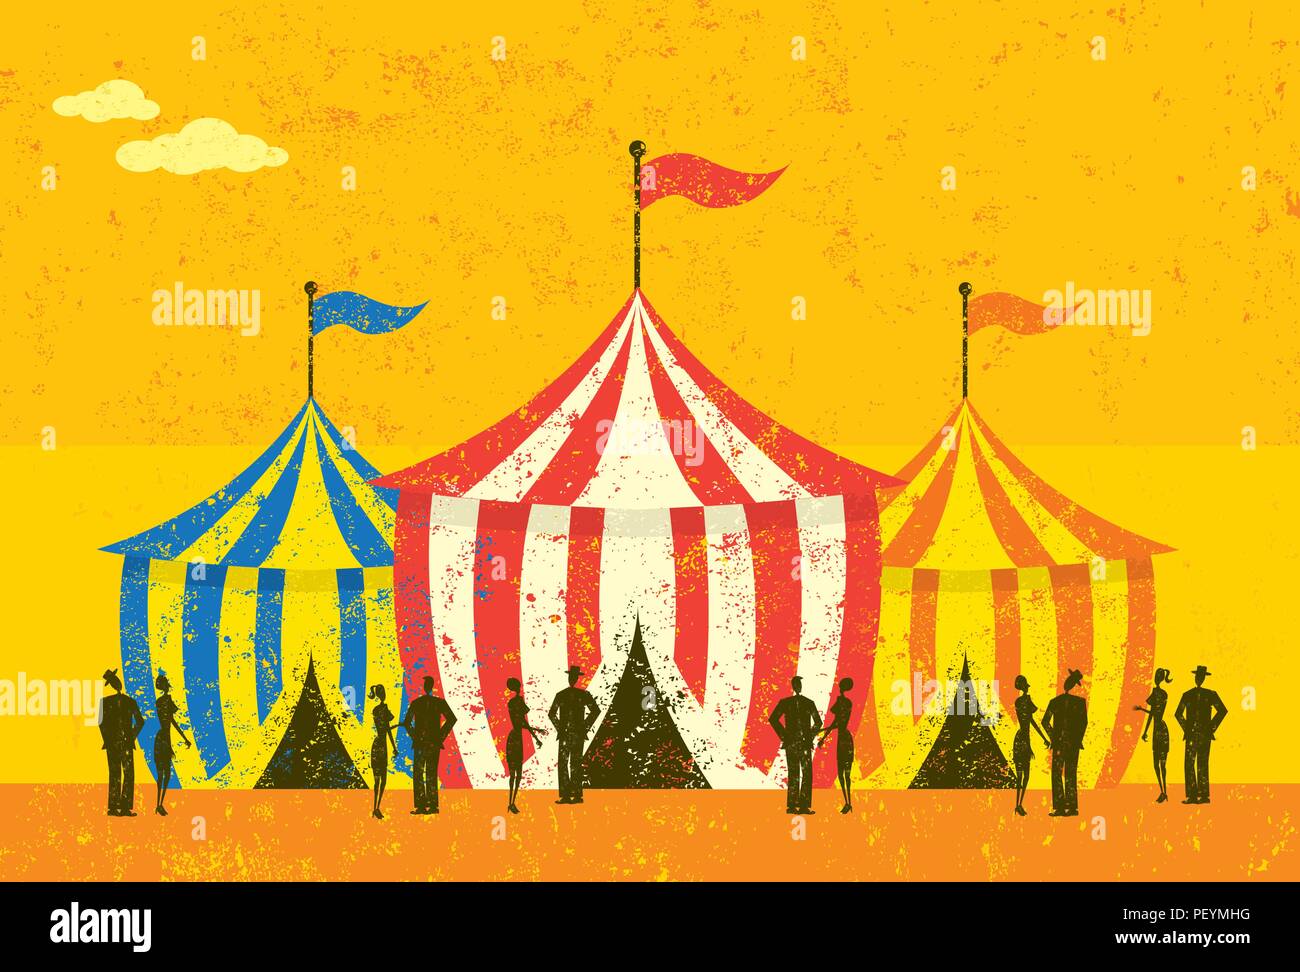 Tent Event. People at an event with circus tents. Stock Vector